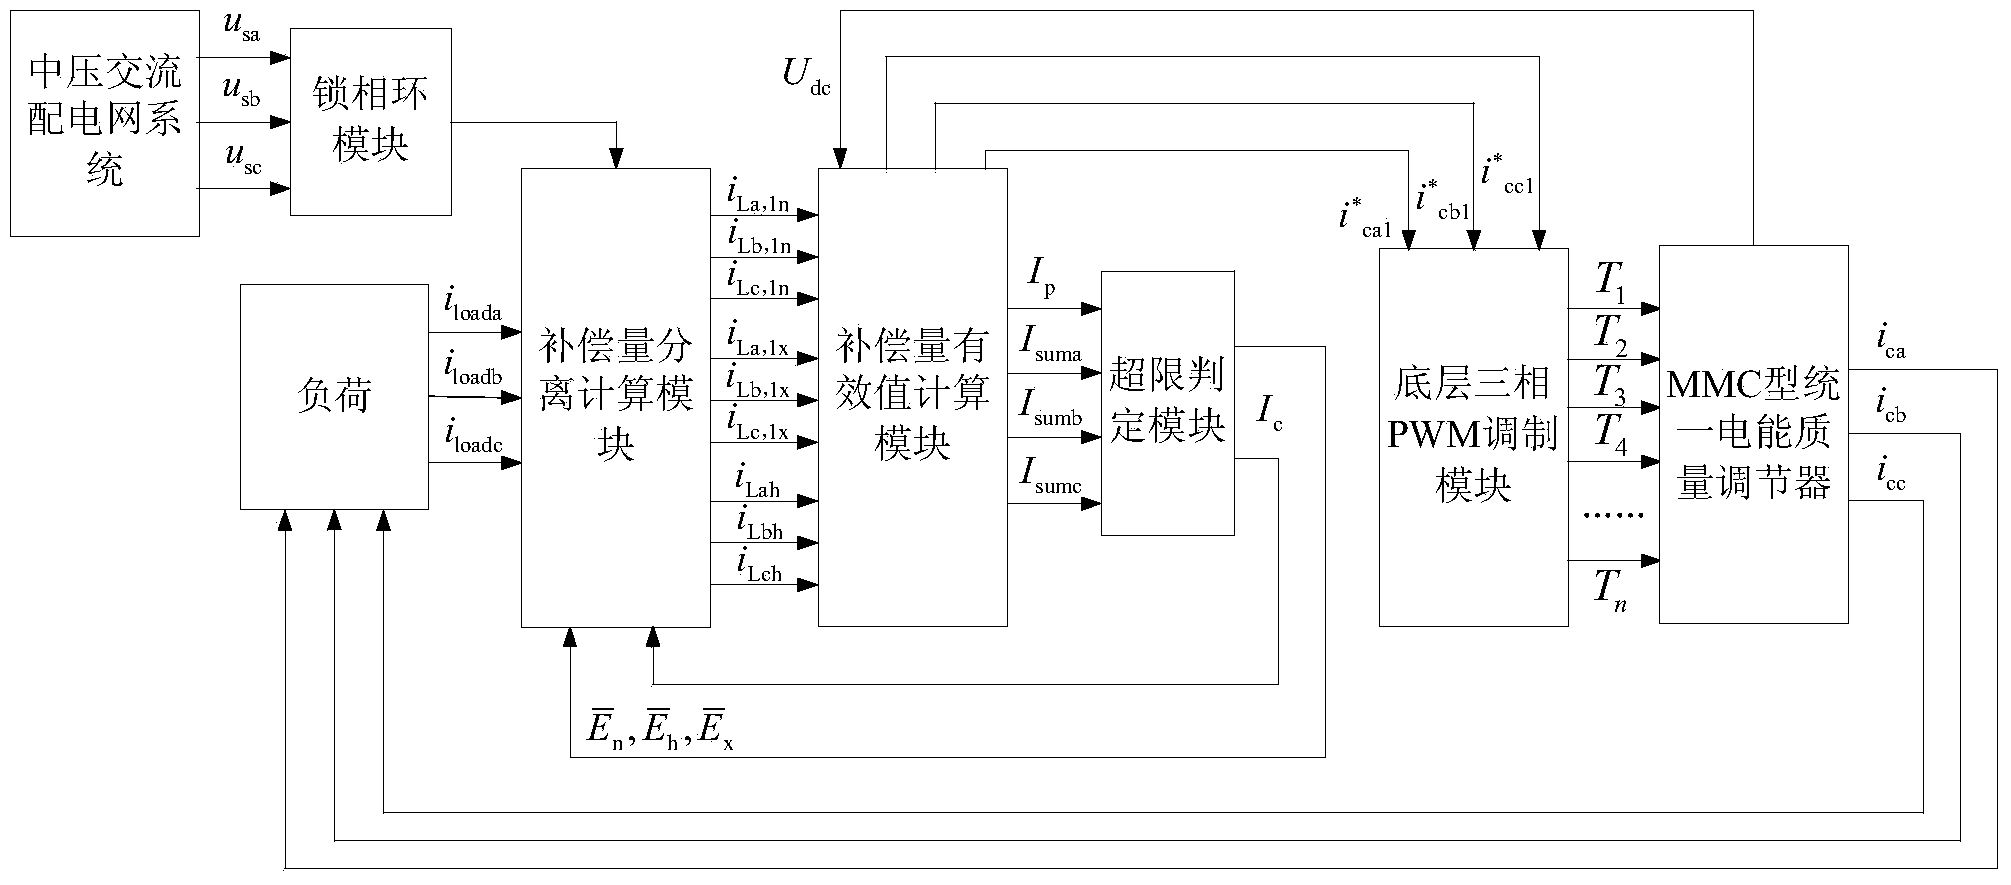 Parallel side compensation optimal-allocation control device and method for MMC (modular multilevel converter (MMC) type UPQC (unified power quality conditioner)